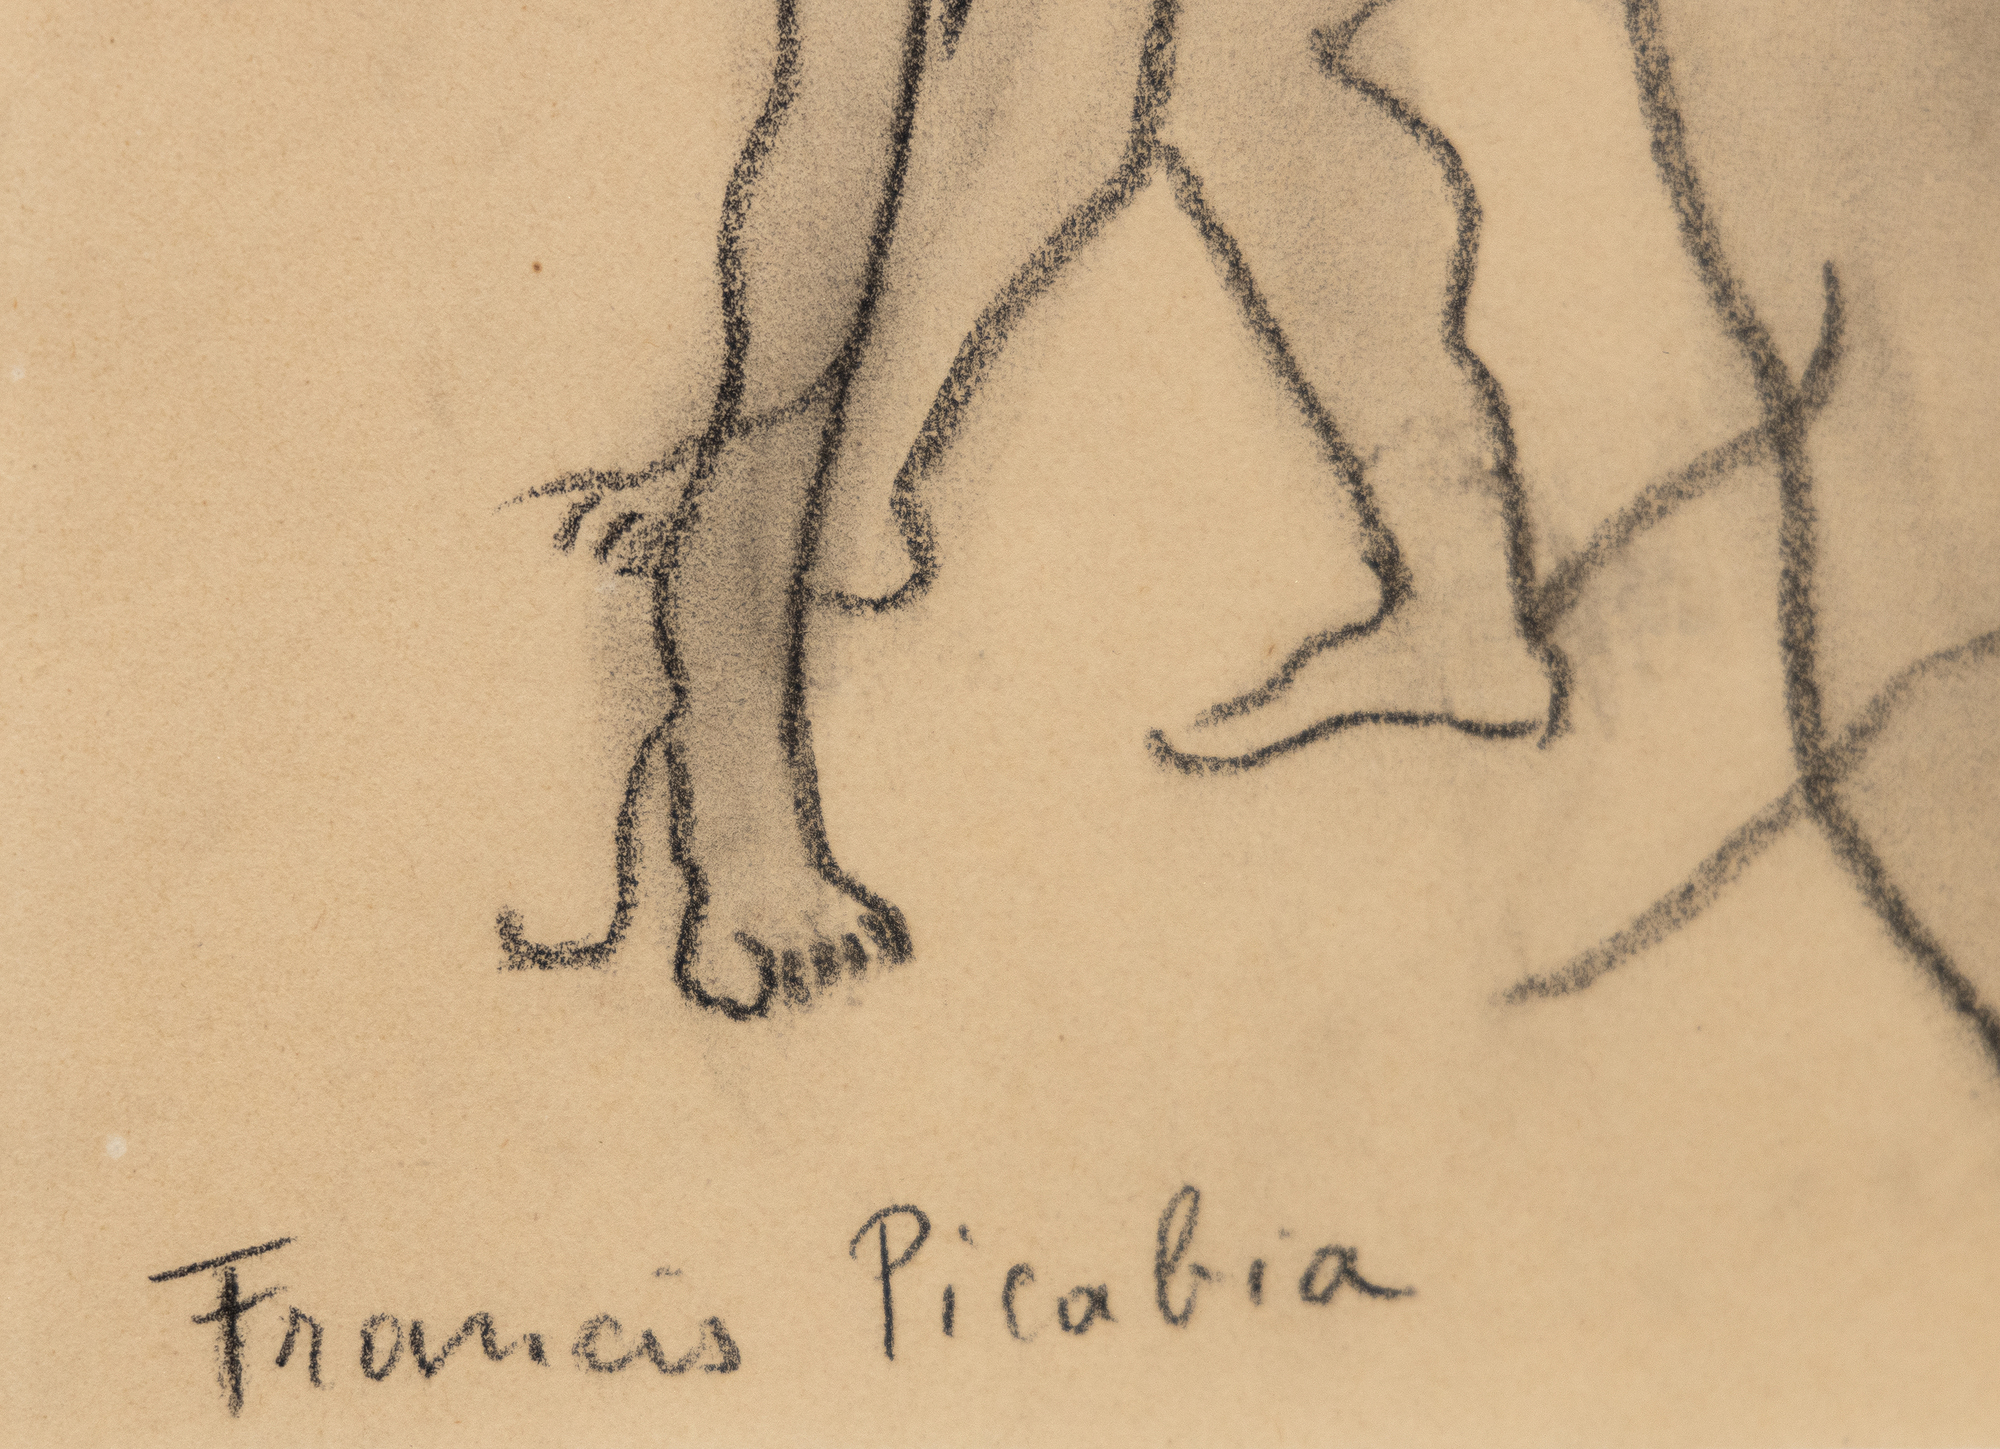 FRANCIS PICABIA - Trois personnages nus - バフ紙に黒のコンテ・クレヨン - 11 1/2 x 8 in.